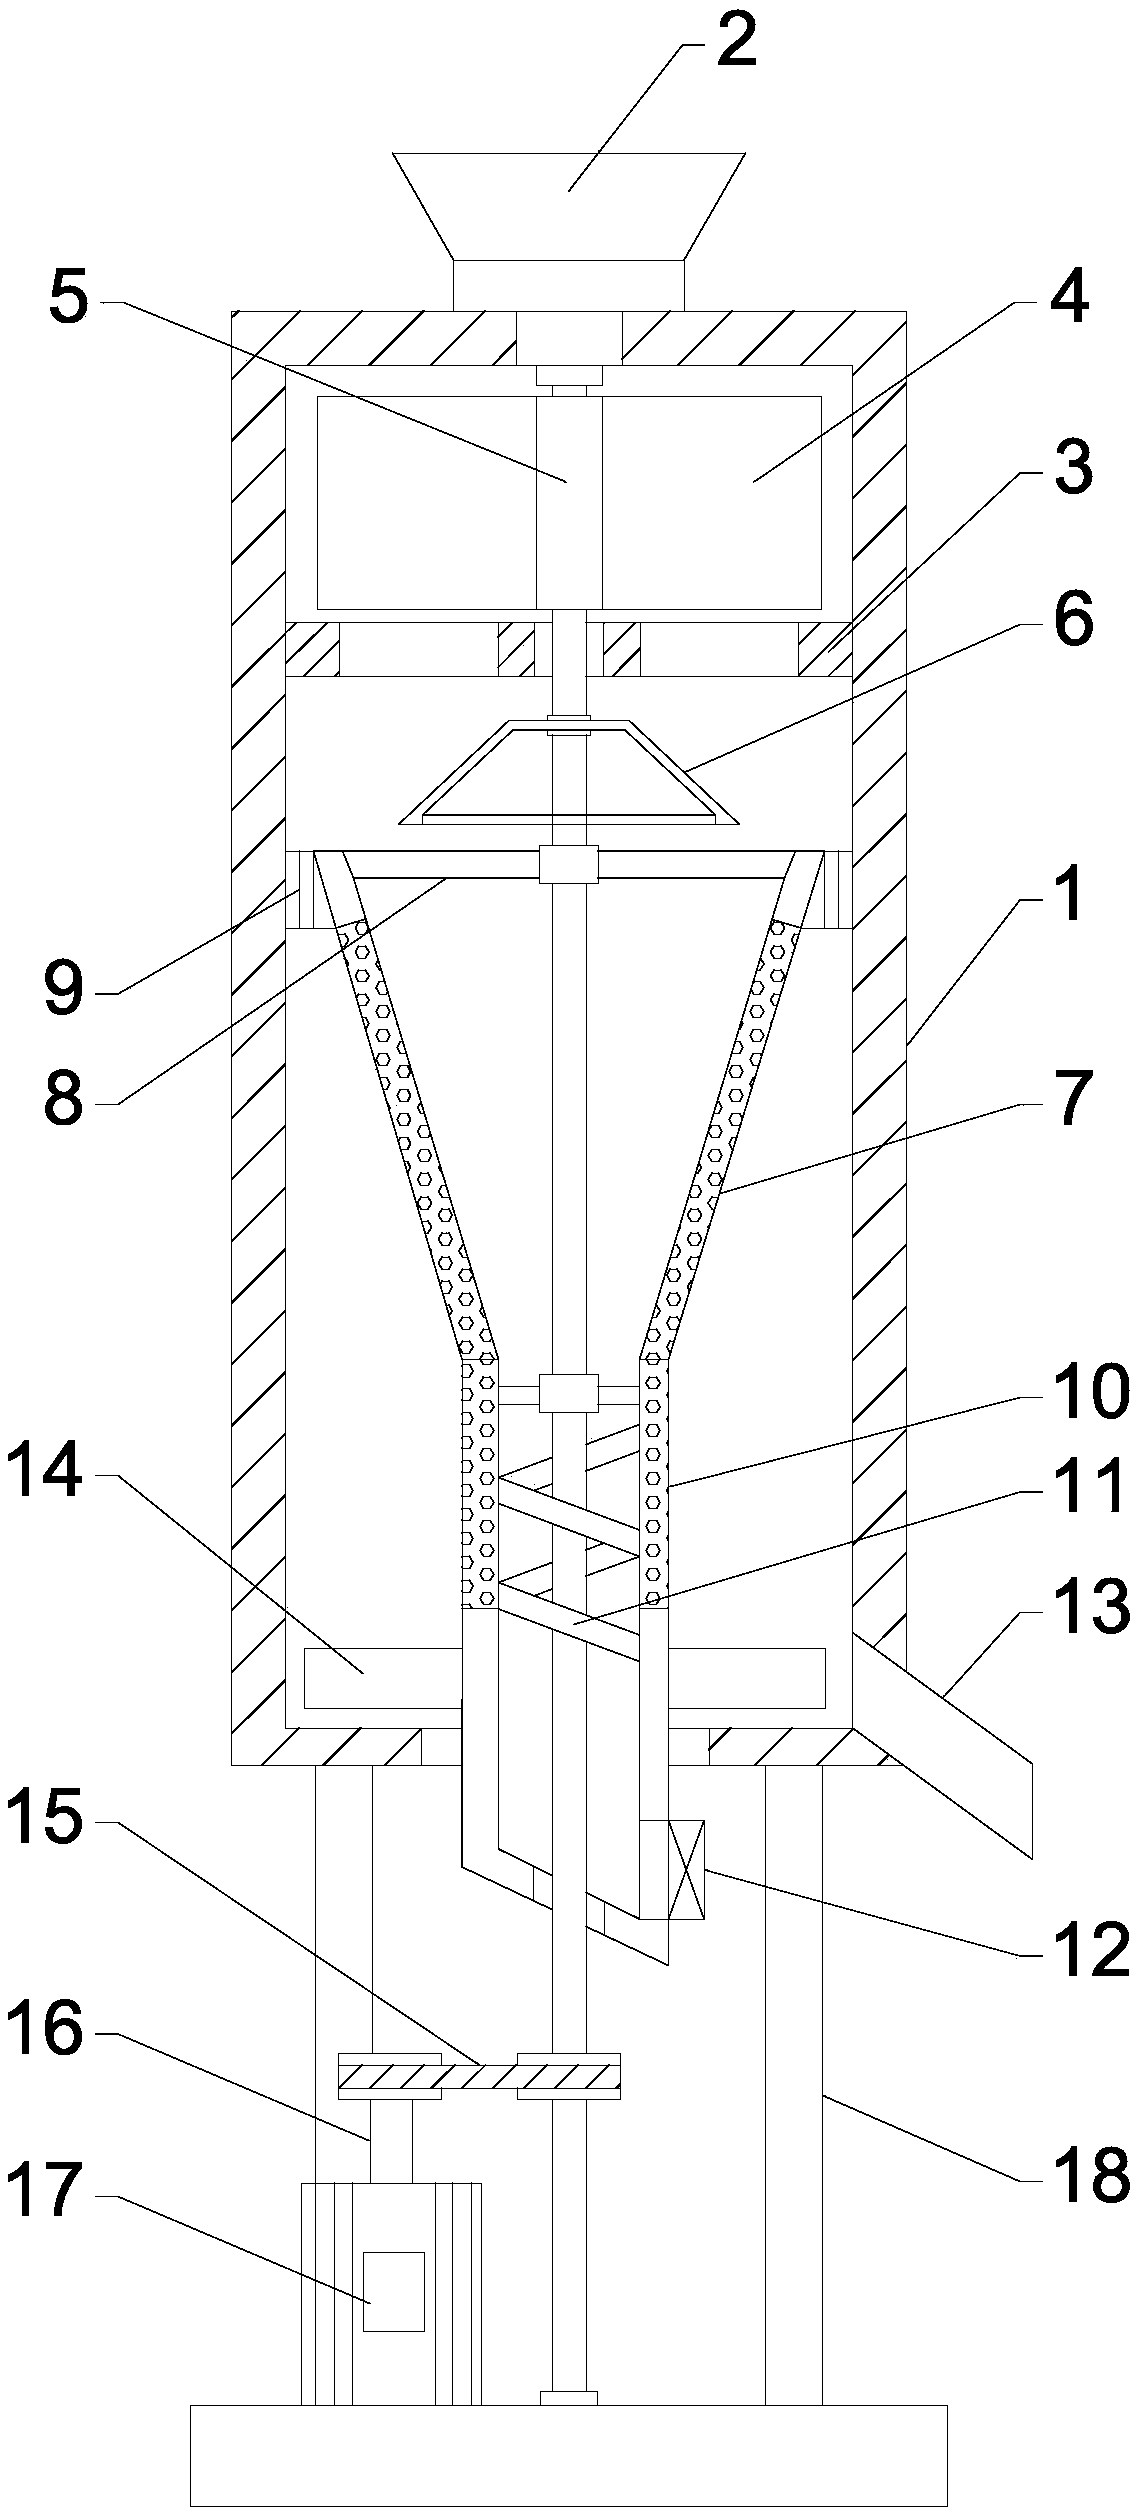 Sand screening device for efficiently separating waste residues